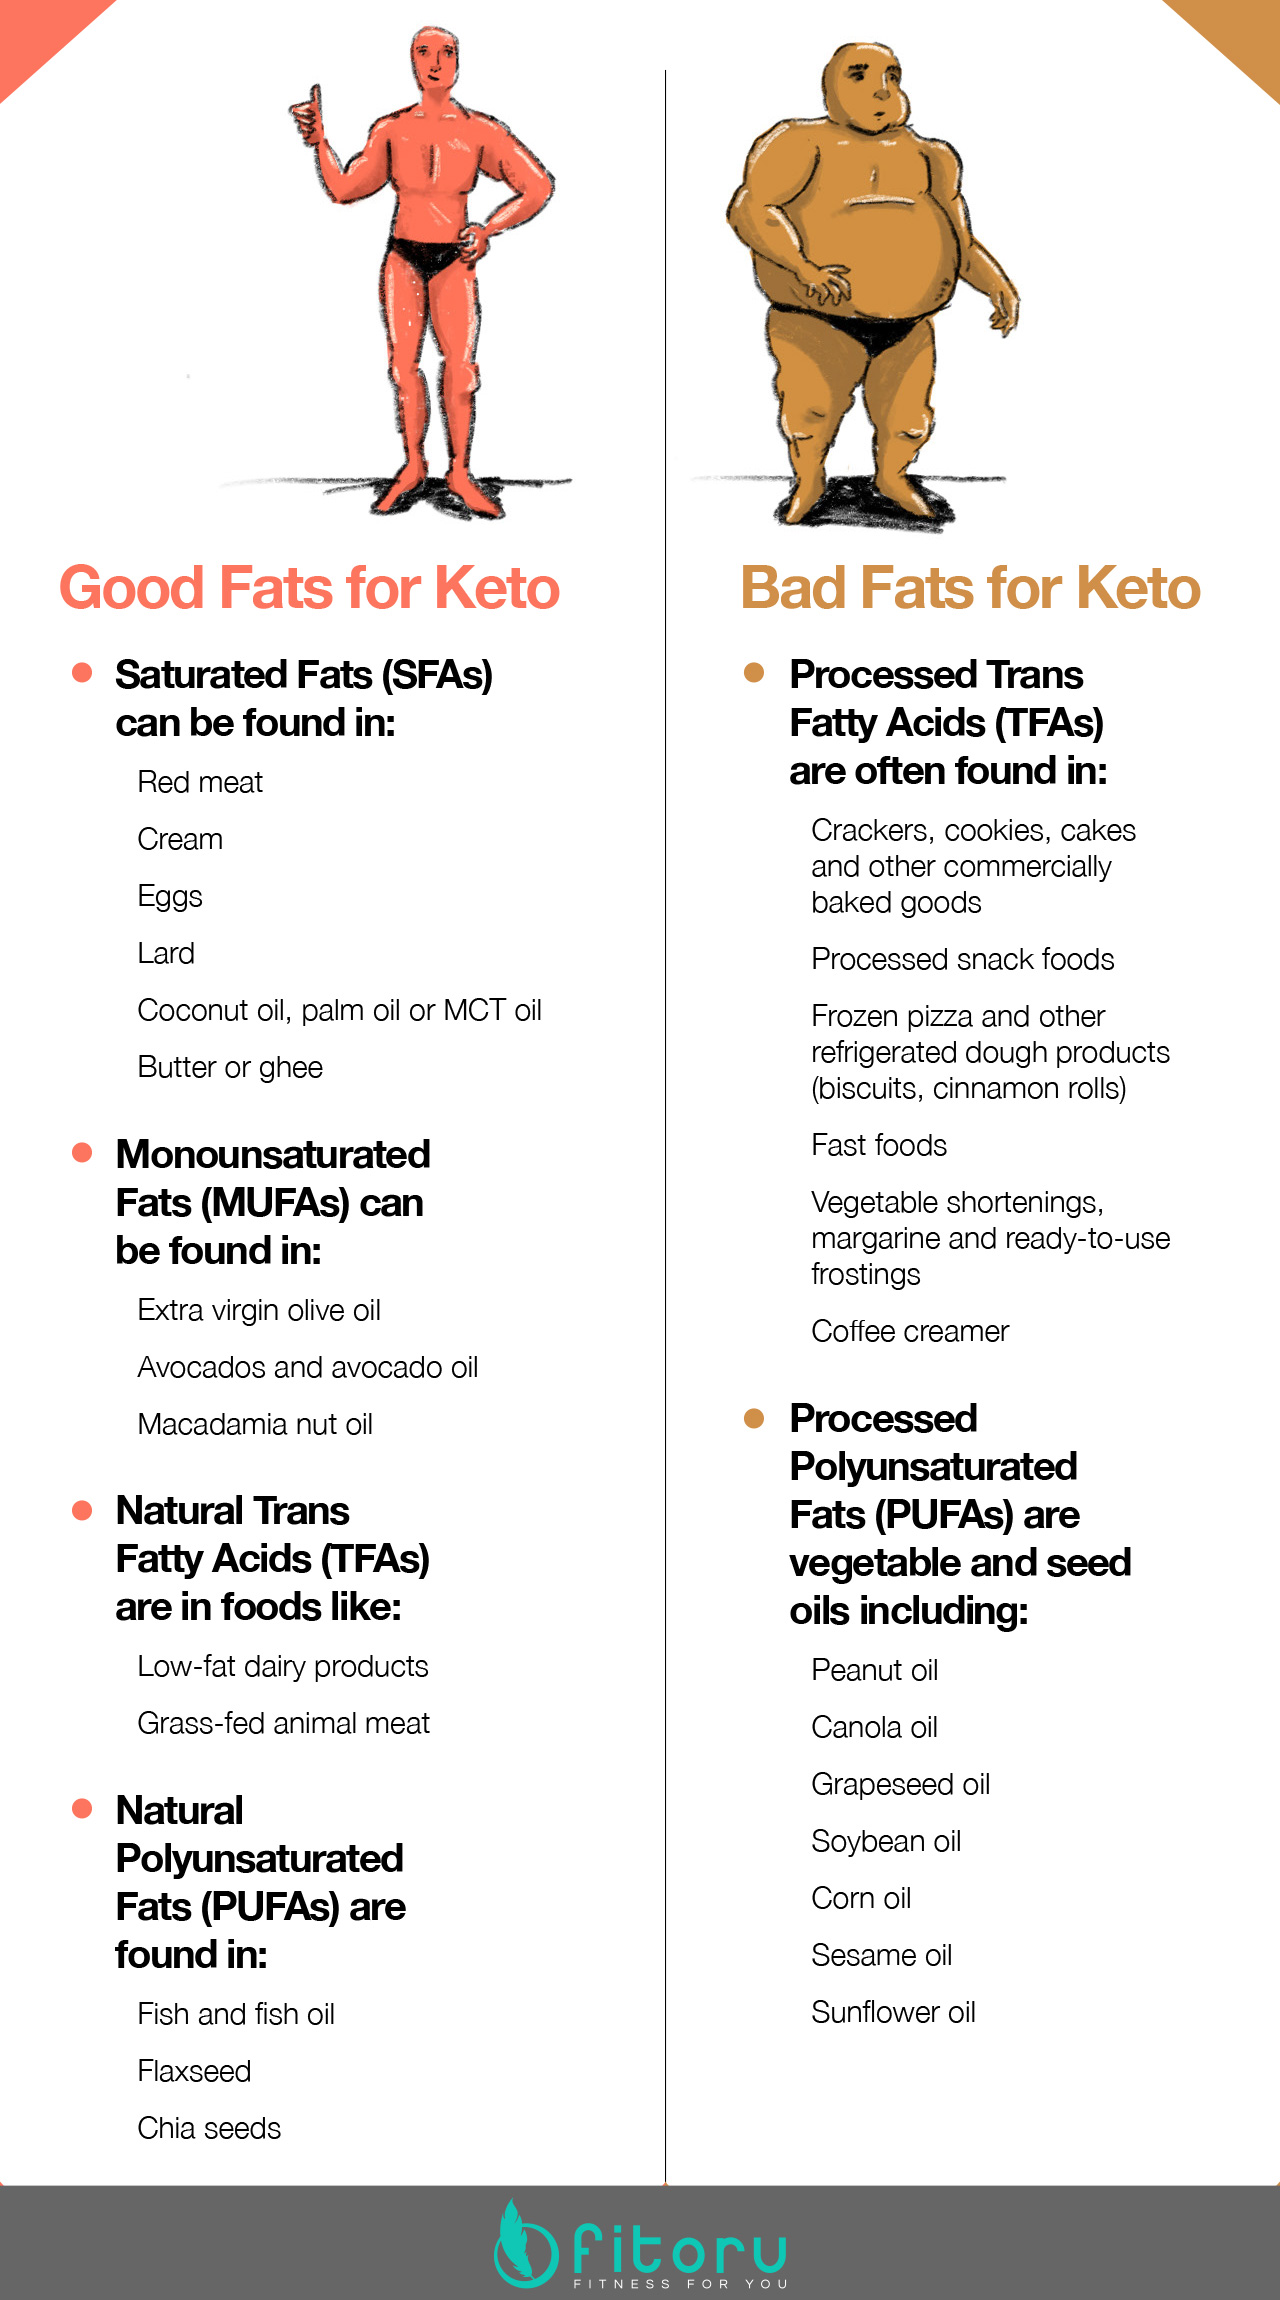 Healthy fats for keto diets.